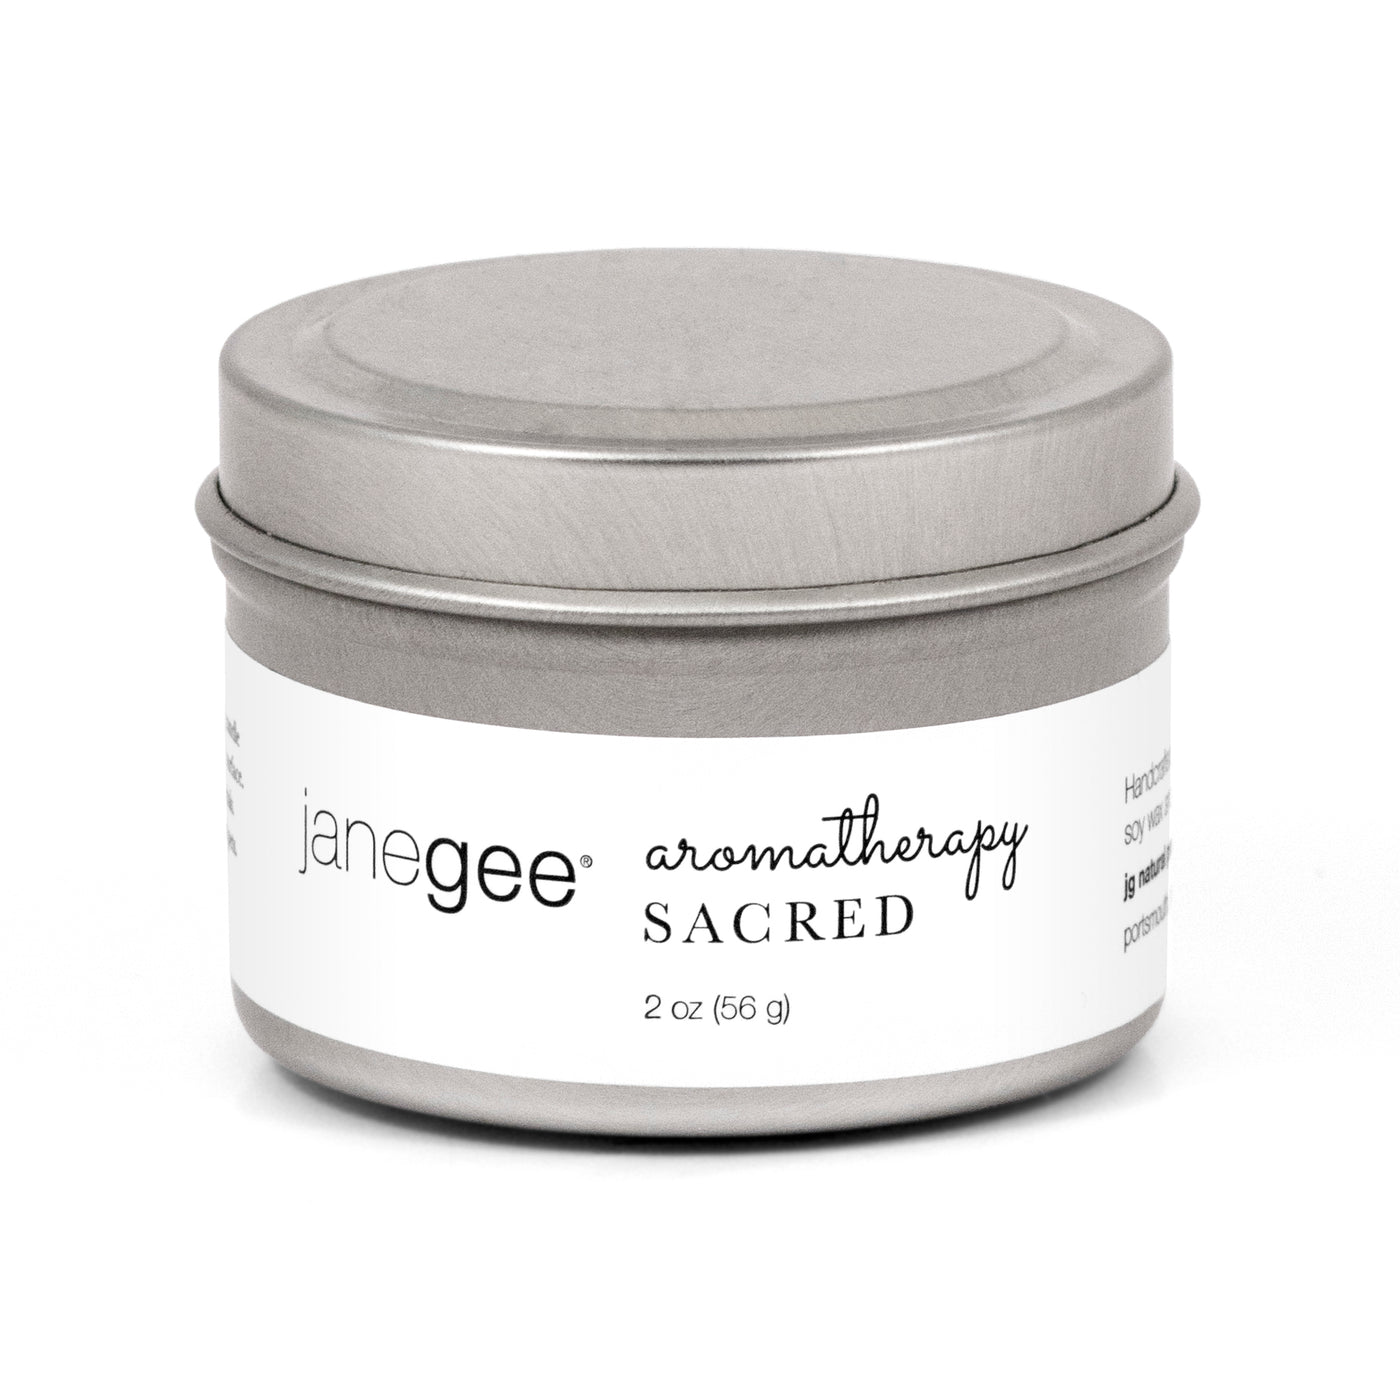 janegee Sacred Aromatherapy Travel Candle *Discontinued*